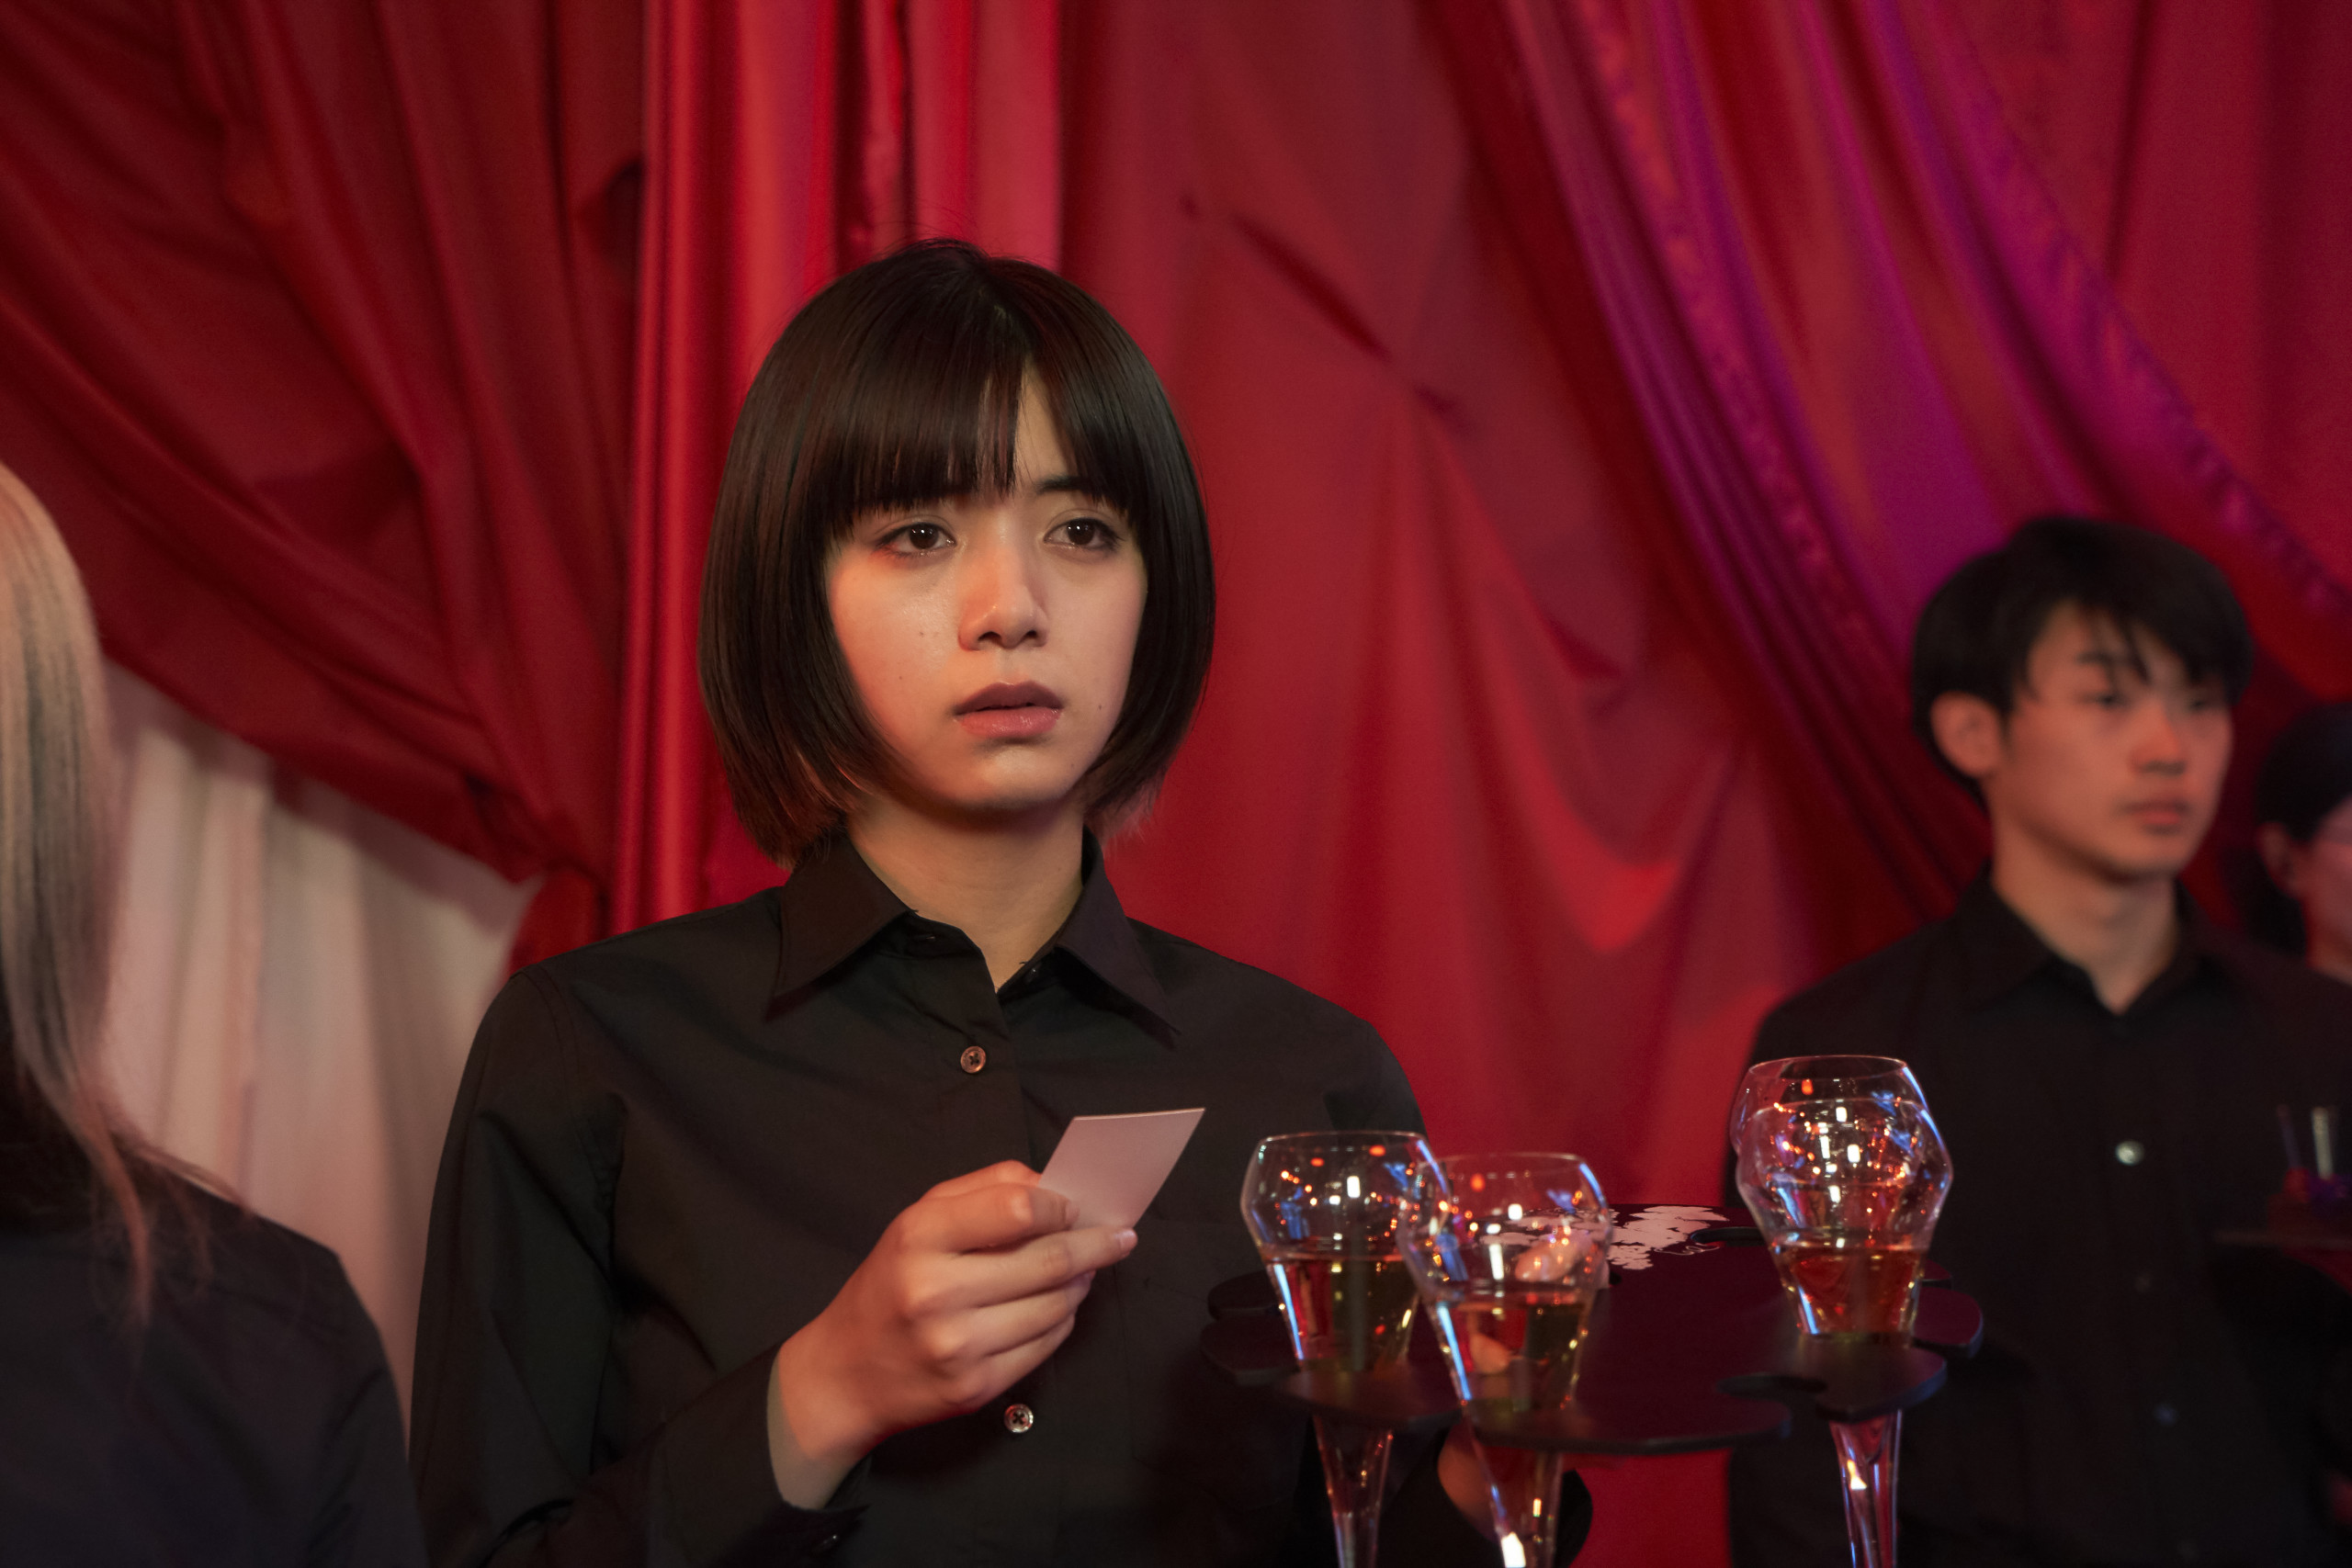 FOLLOWERS, JAPANESE ORIGINAL SERIES LAUNCHES GLOBALLY ON NETFLIX ON FEBRUARY 27, 2020 